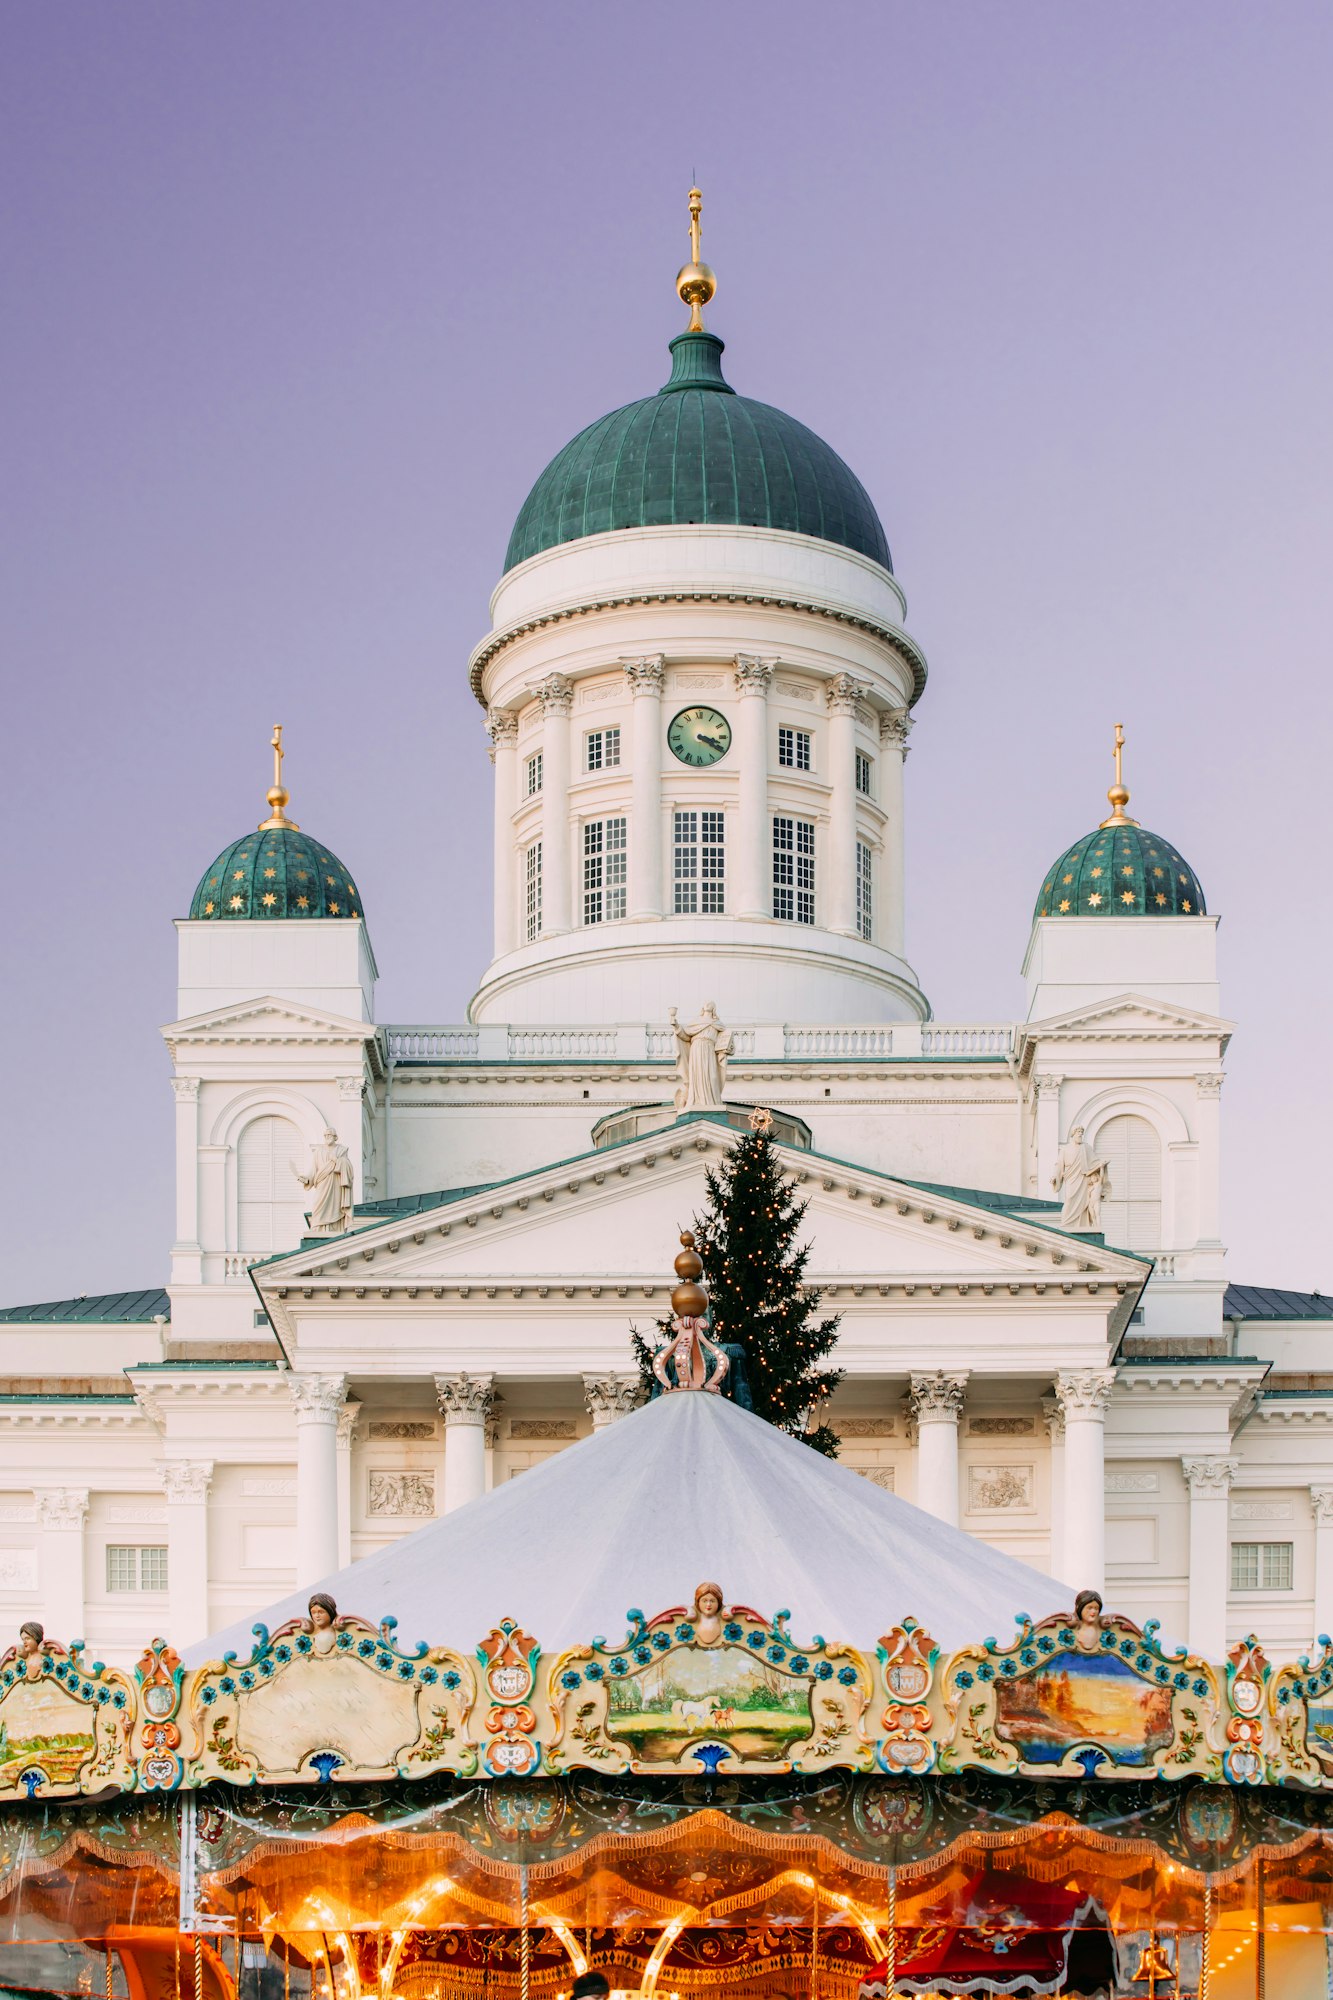 Helsinki, Finland. Xmas Market On Senate Square With Holiday Carousel And Famous Landmark Is